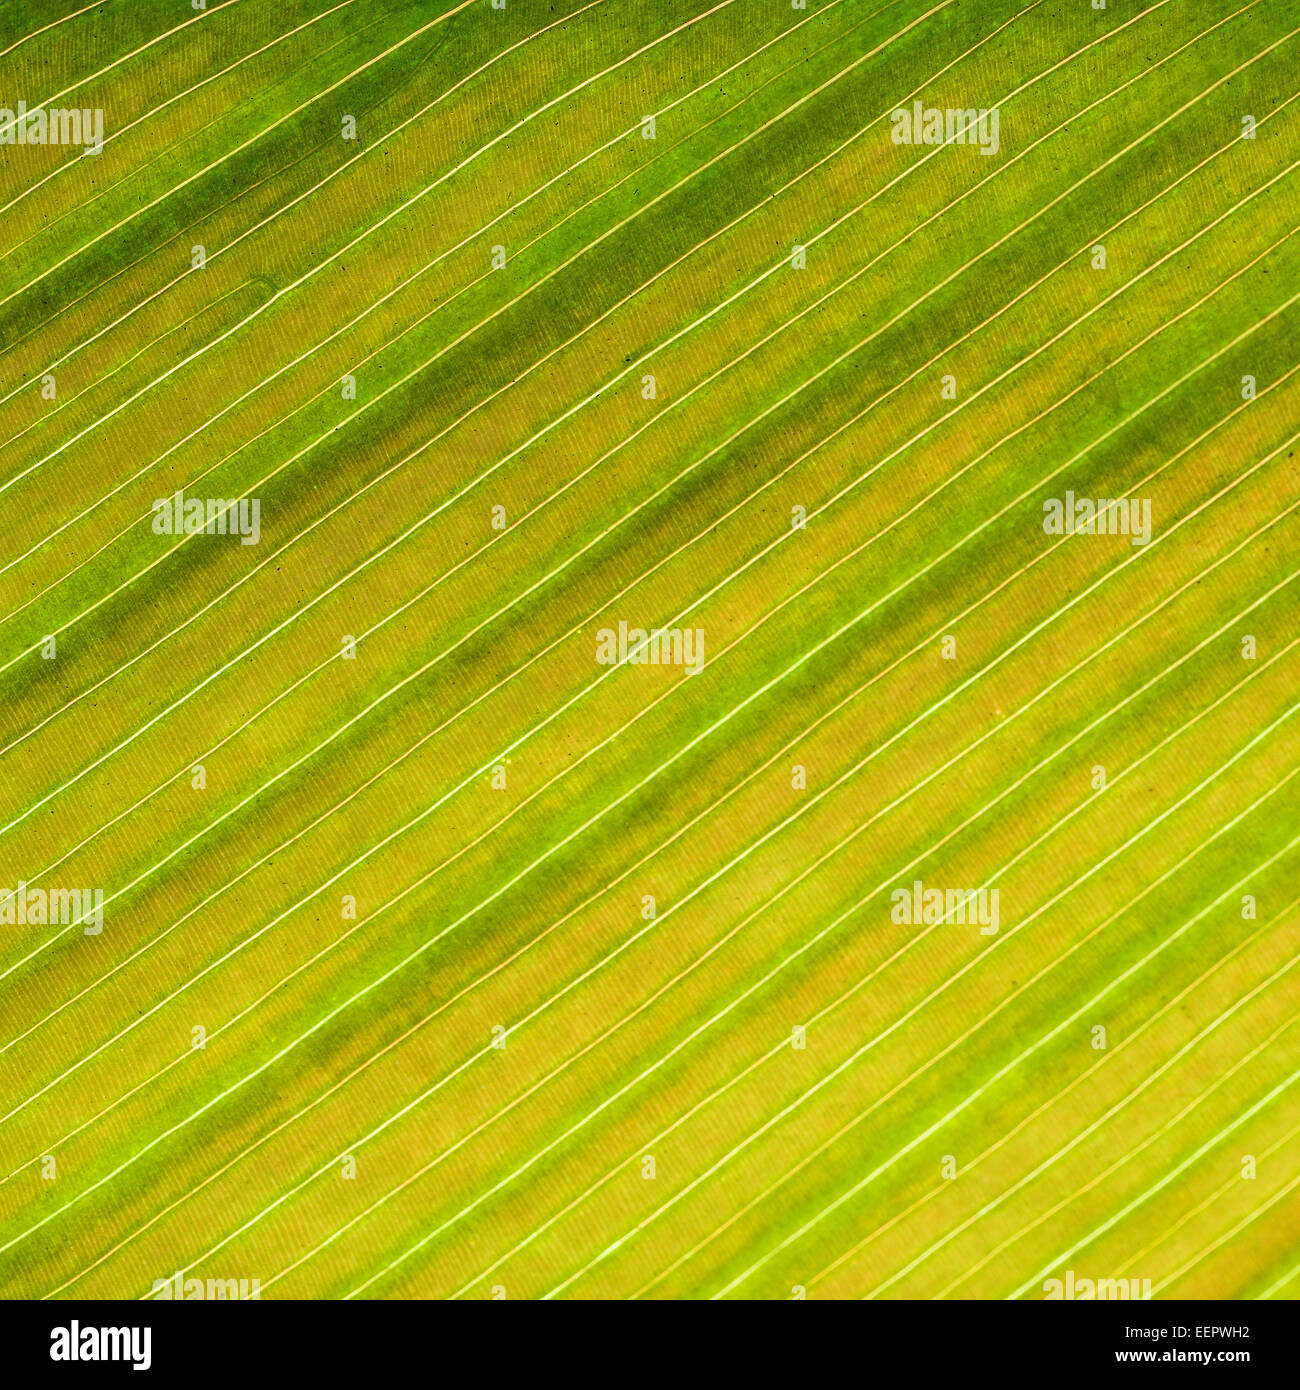 Green leaf abstract background texture Stock Photo